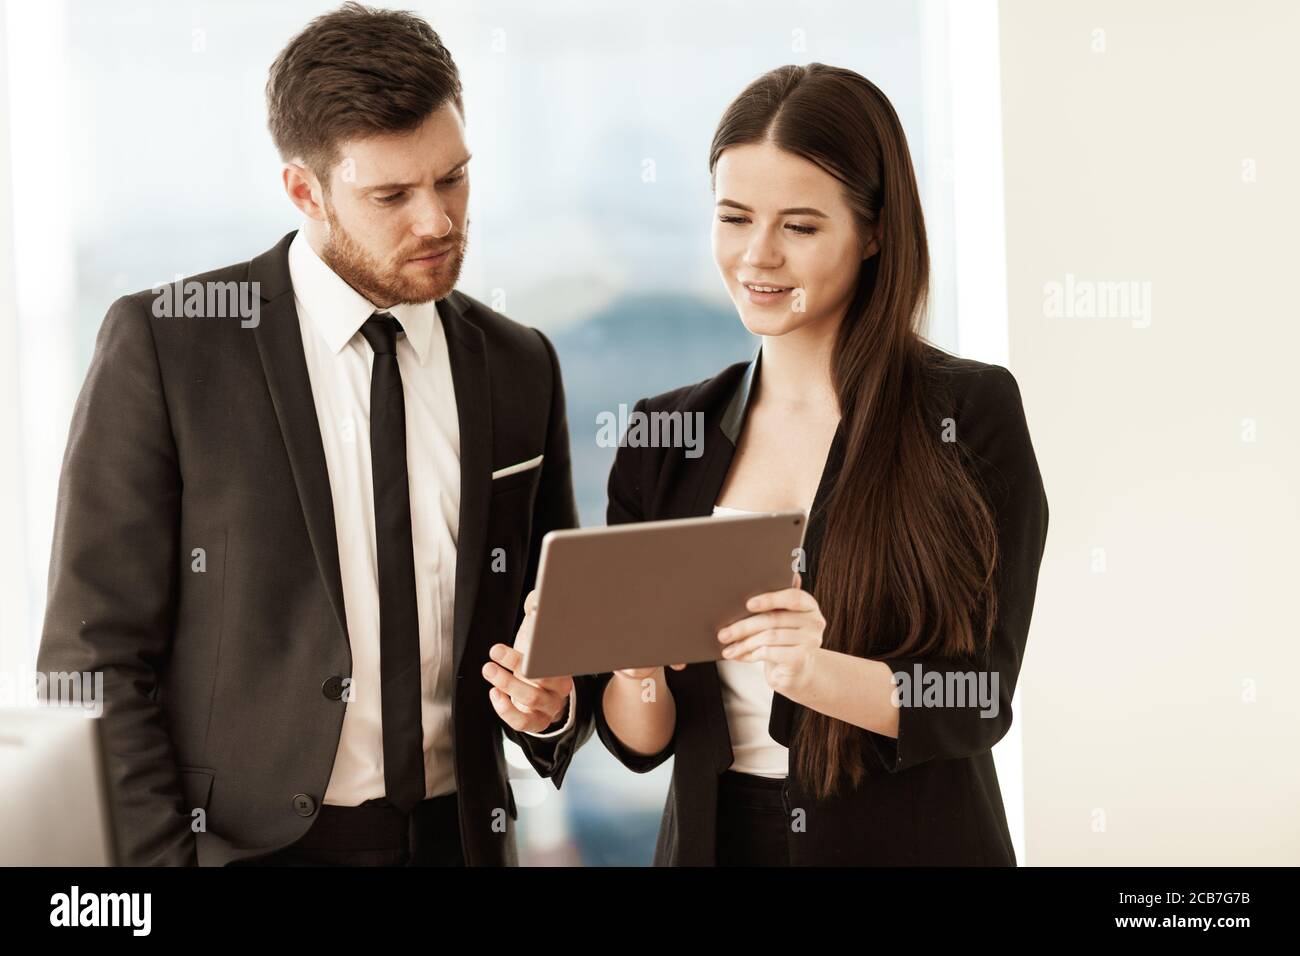 Successful business and modern technology concept. Young businesswoman and happy smiling businessman working together using tablet computer. Two Stock Photo